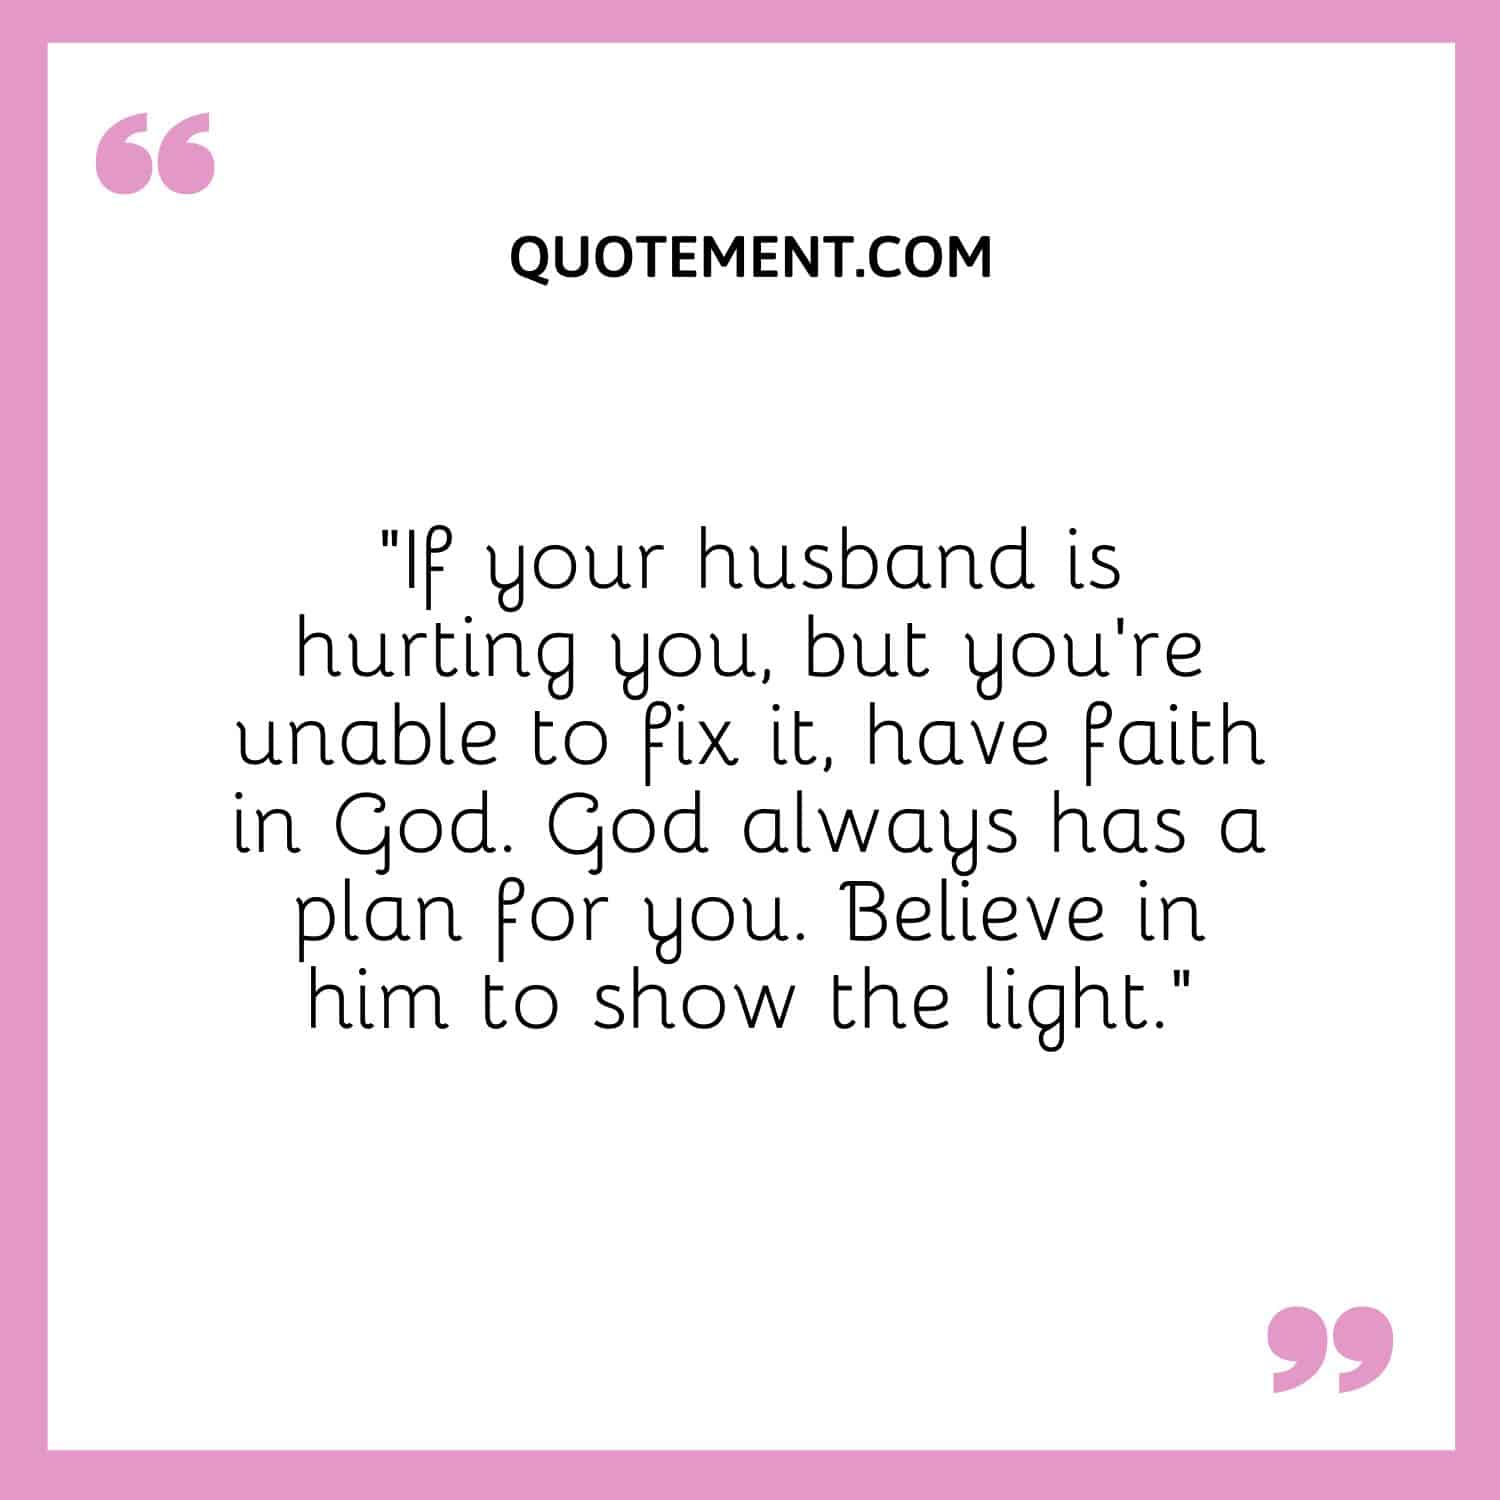 If your husband is hurting you, but you’re unable to fix it, have faith in God